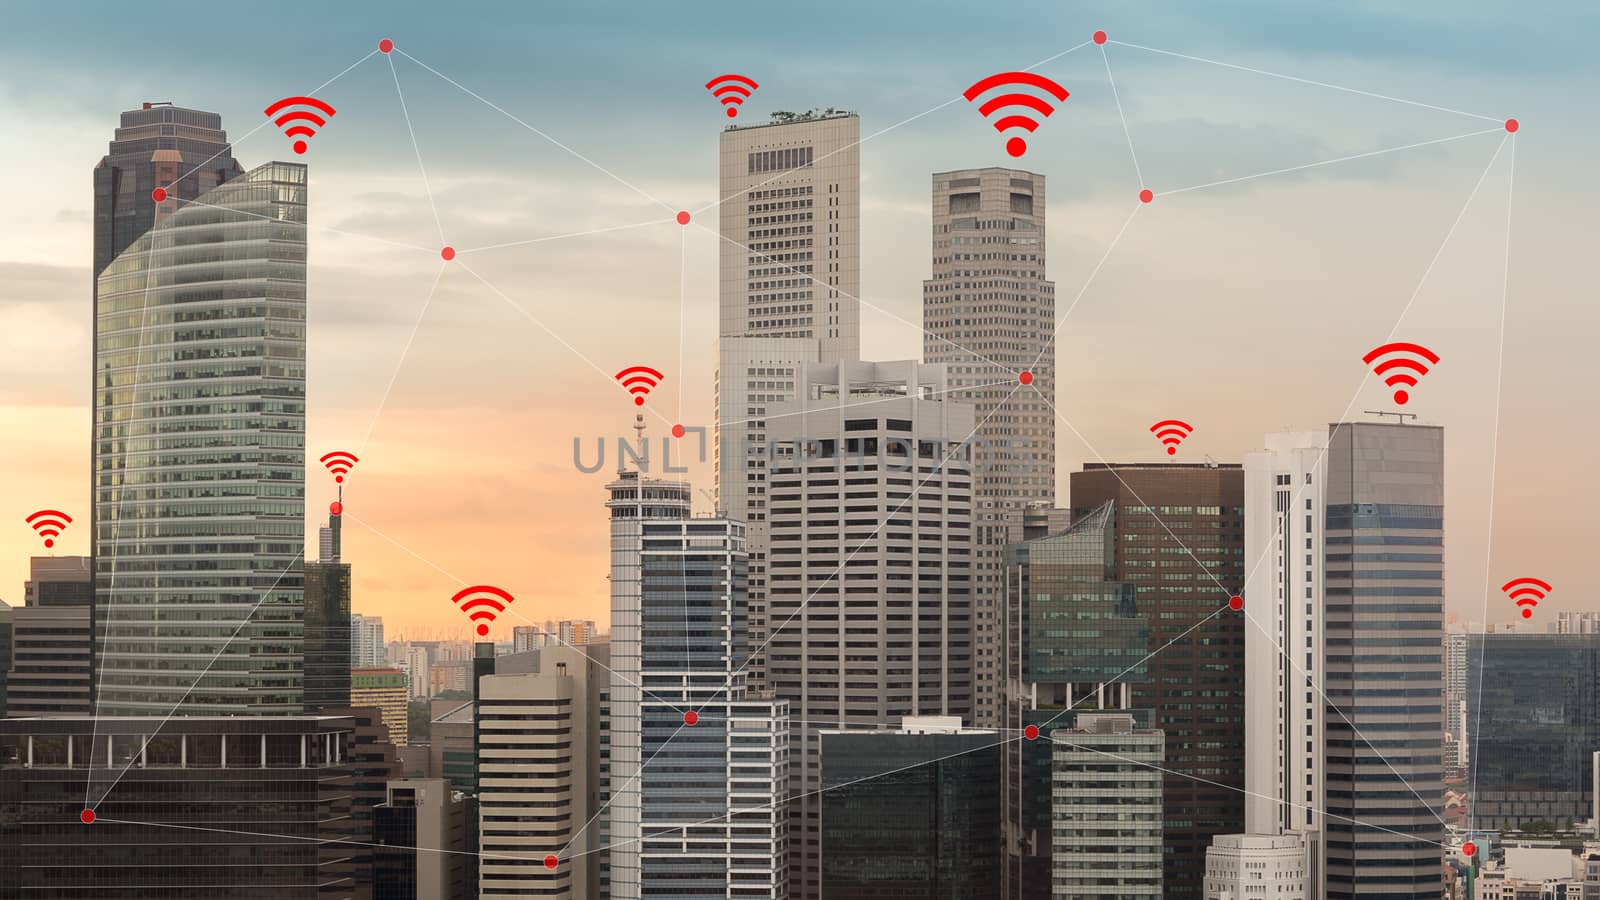 IOT and Smart City Concept Illustrated by Wireless Networking an by supparsorn